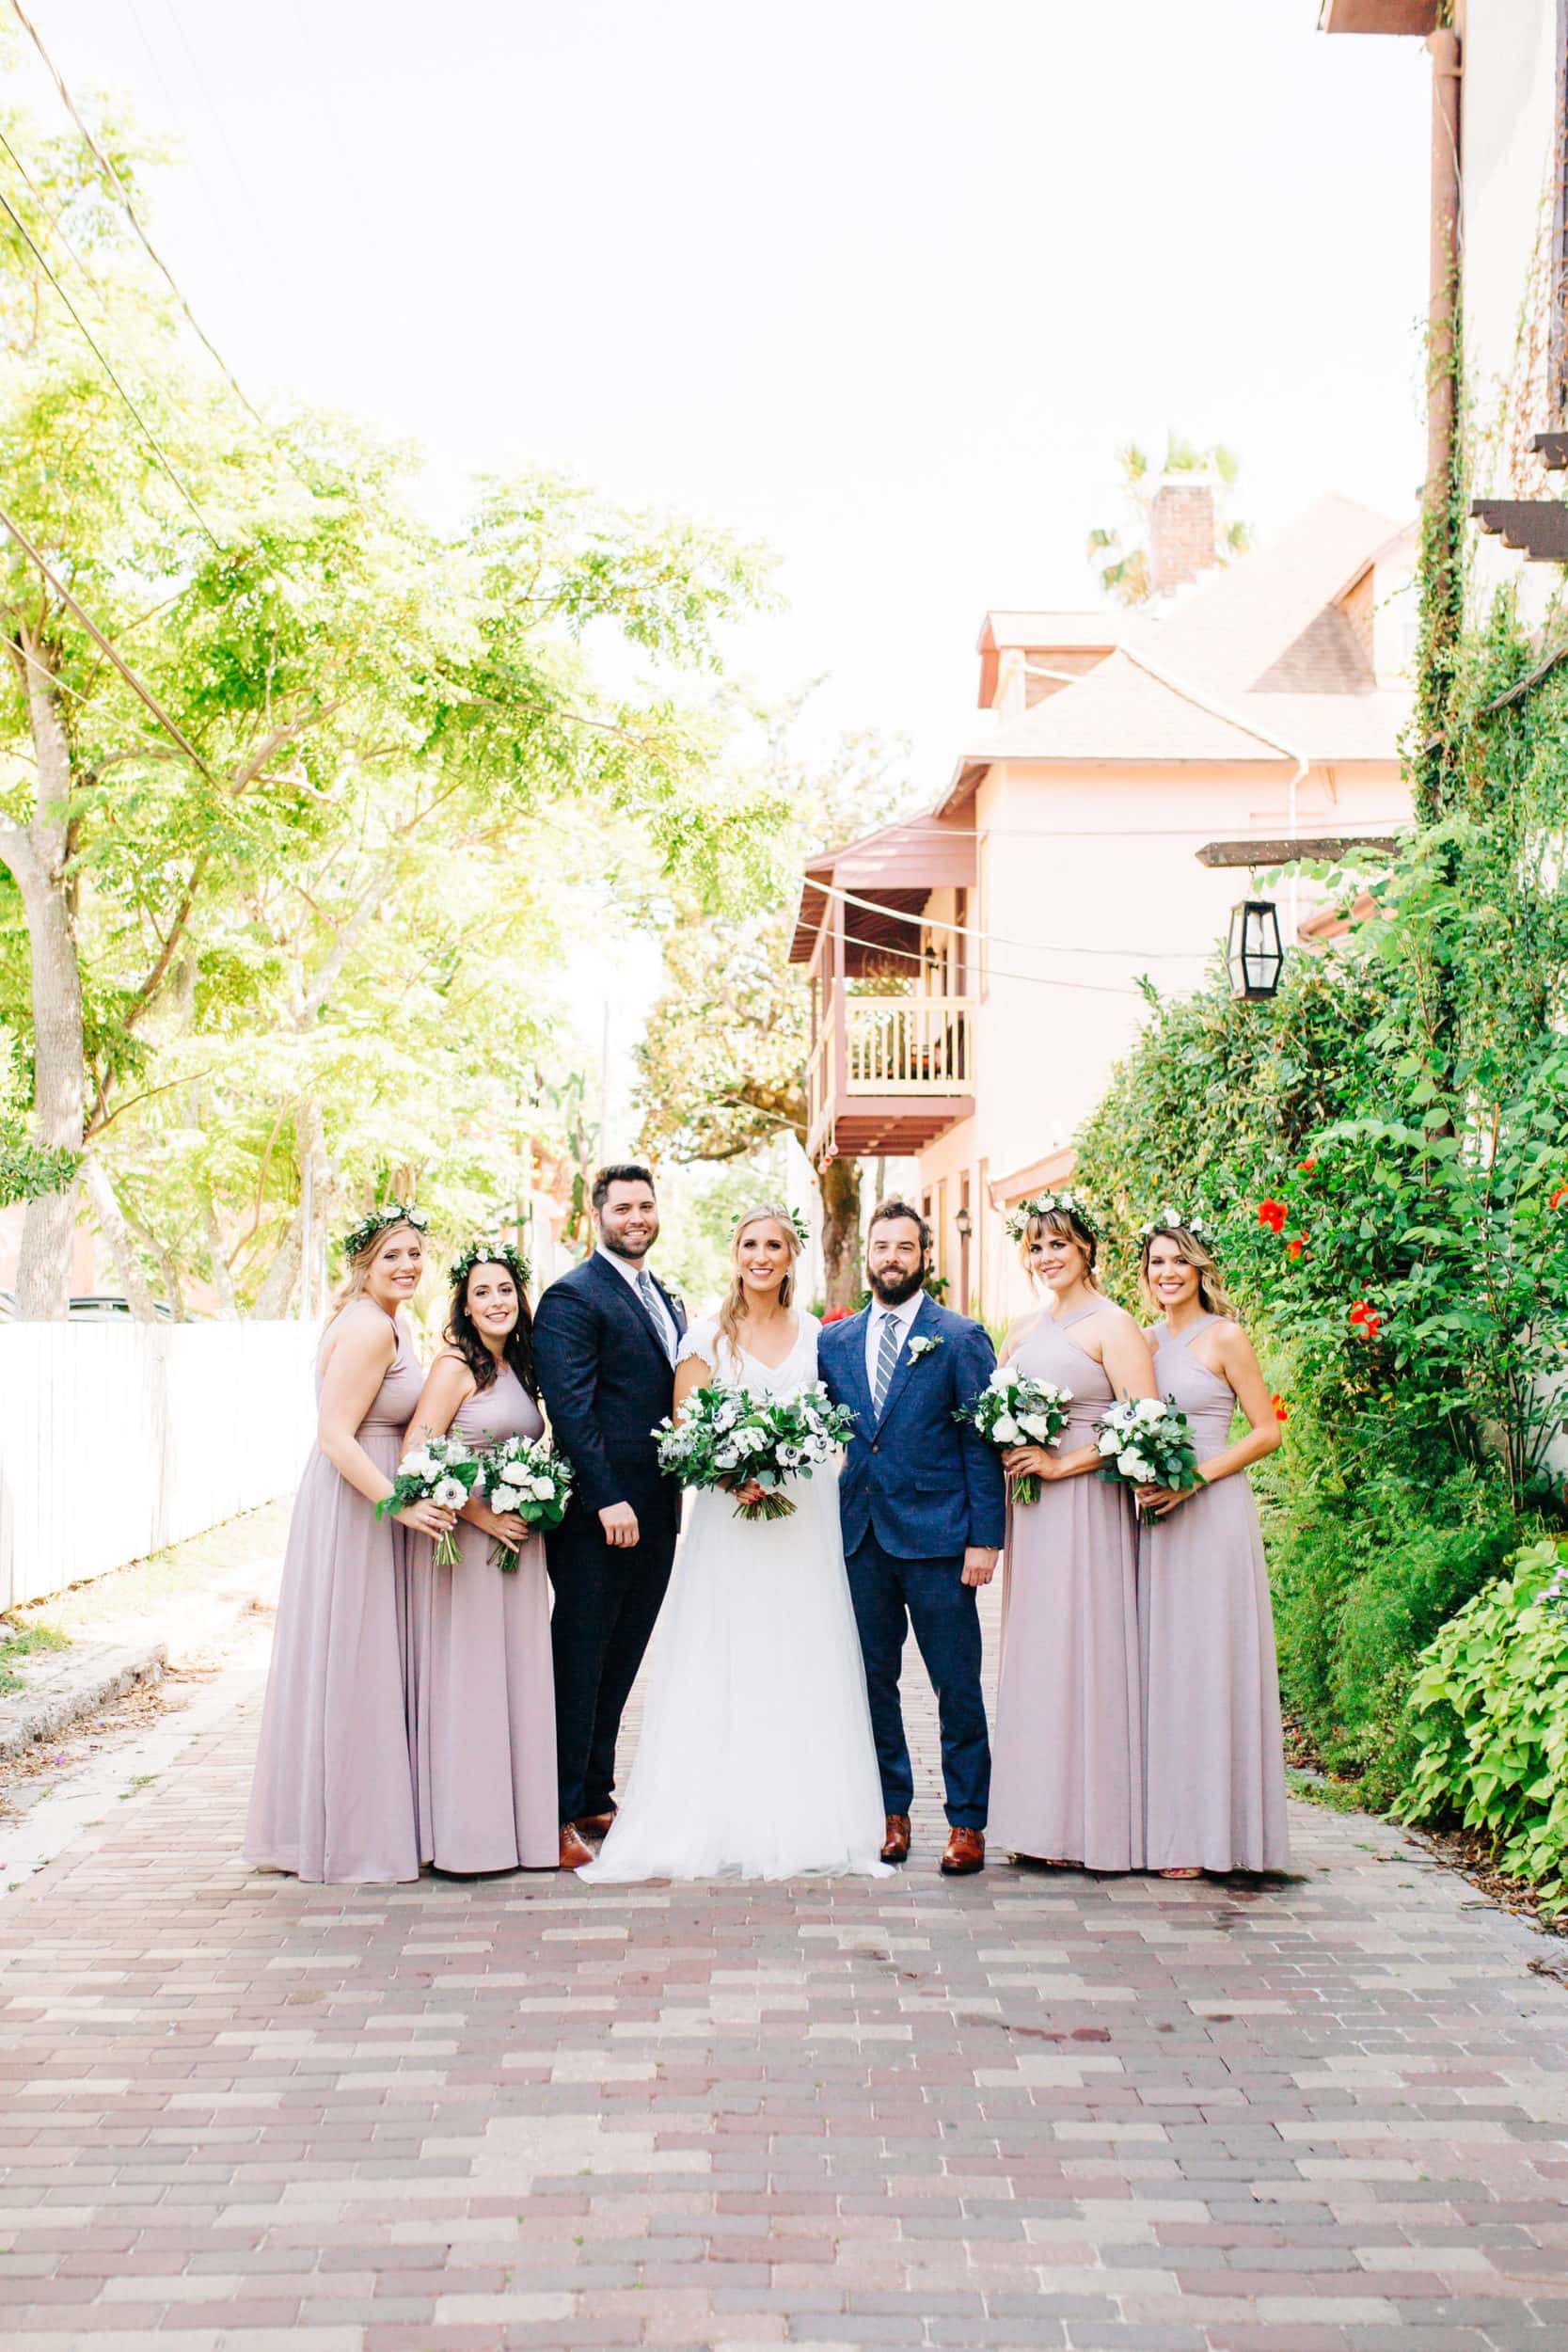 bride and groom with bridesmaids in pale lavender with white flowers and groomsmen with navy suit at white room wedding